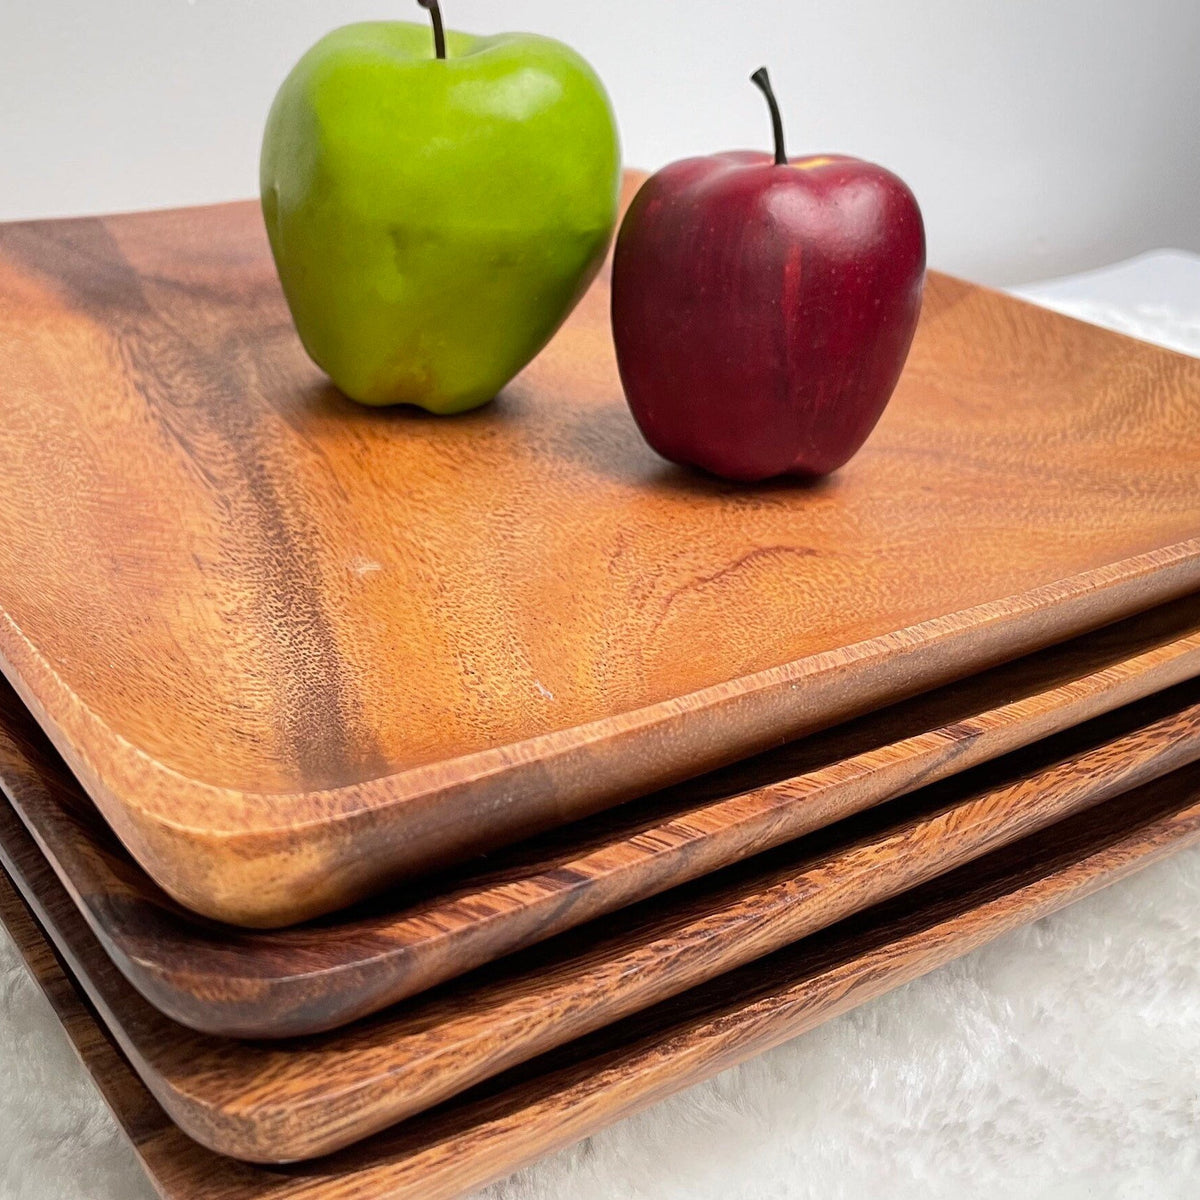 14 " Large Acacia Wood Square Plate, Serving Plate